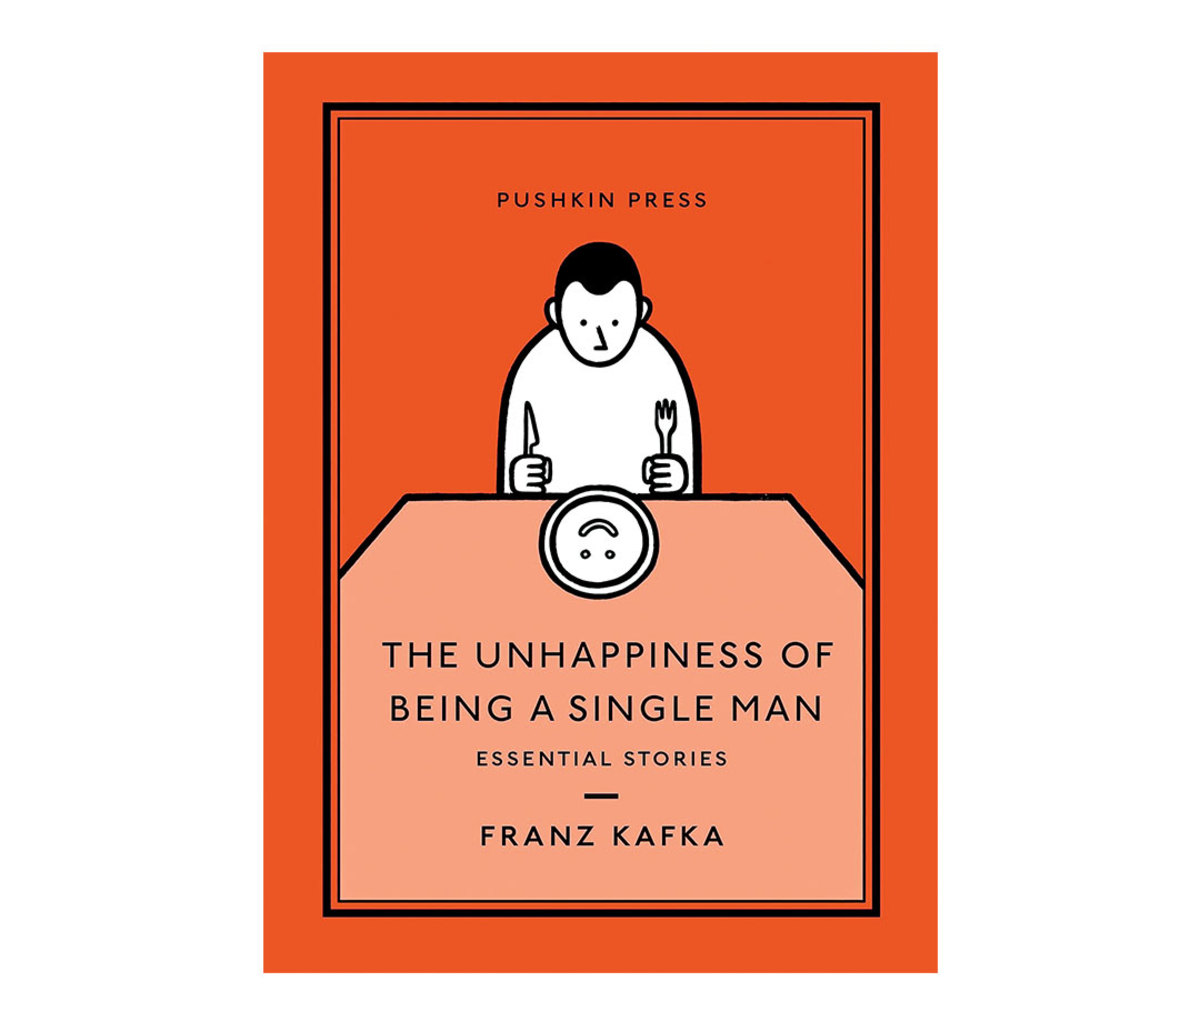 'The Unhappiness of Being a Single Man' by Franz Kafka